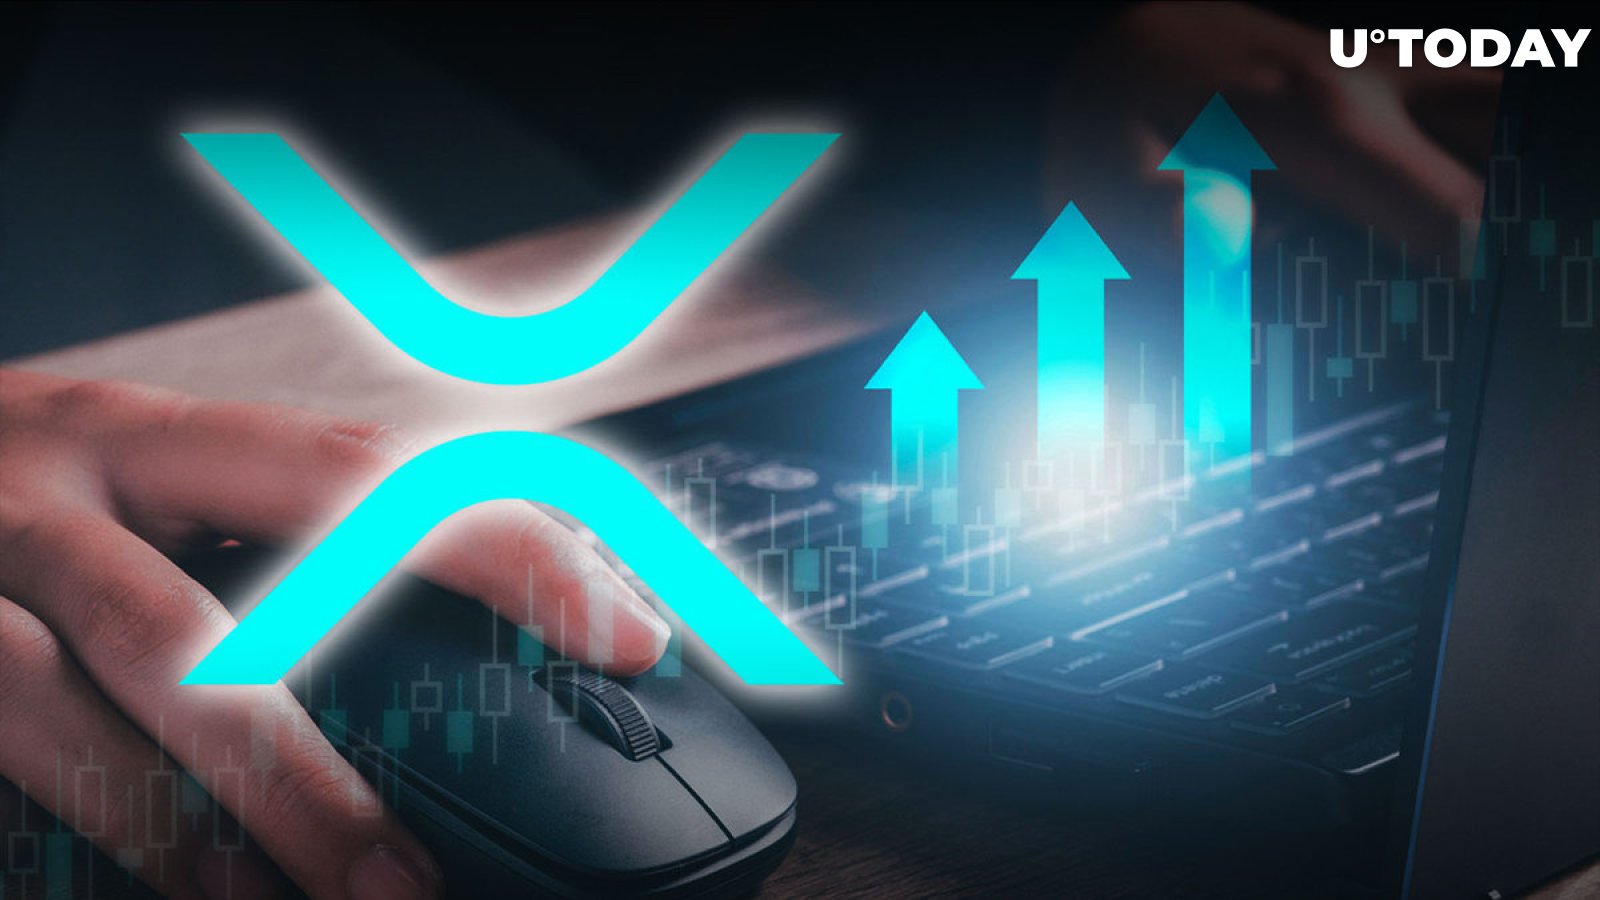 Ripple Unveils Crypto Utility Focus for 2023, XRP Price in Green: Details